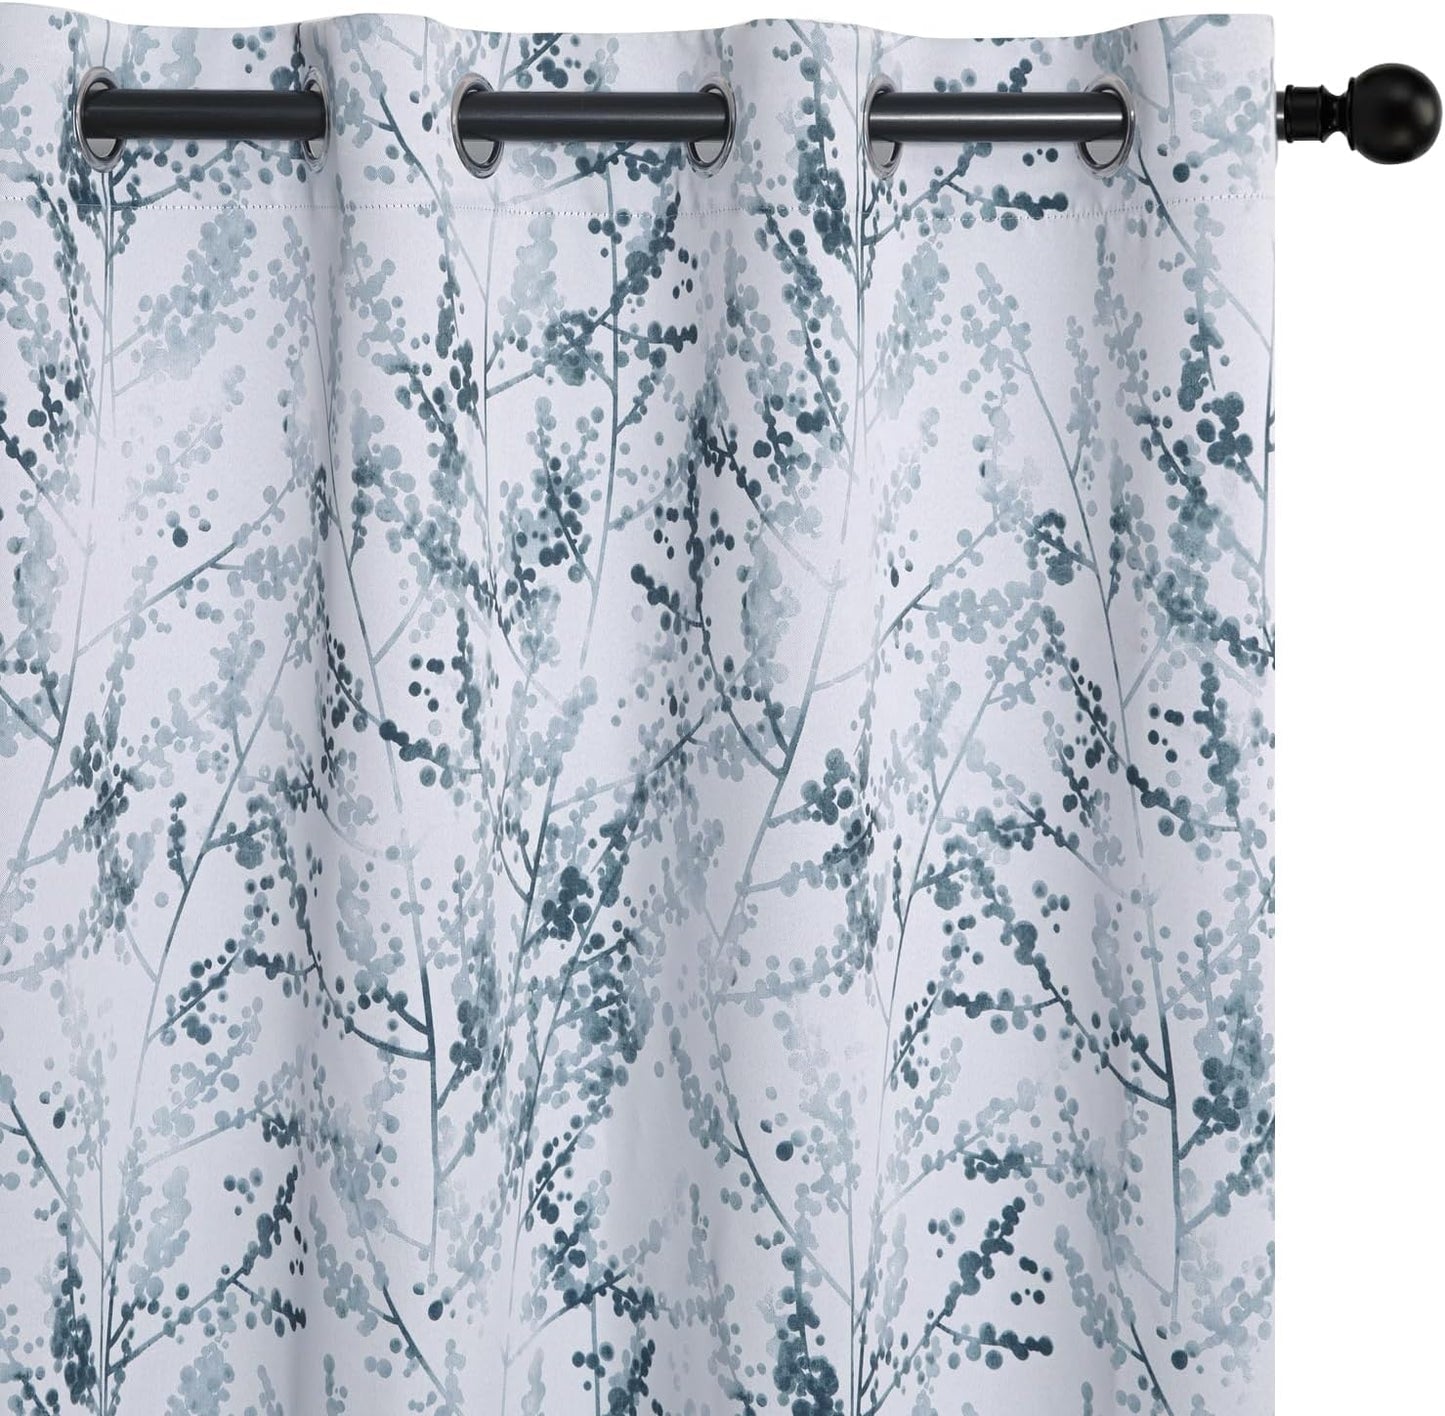 MYSKY HOME Living Room Curtains 84 Inches Long Thermal Insulated Room Darkening Curtains for Dining Room Patio Leaf Pattern Grommet Drapes for Bedroom, Sage, 2 Pieces  MYSKY HOME Branch-Navy Blue 52"W X 84"L 